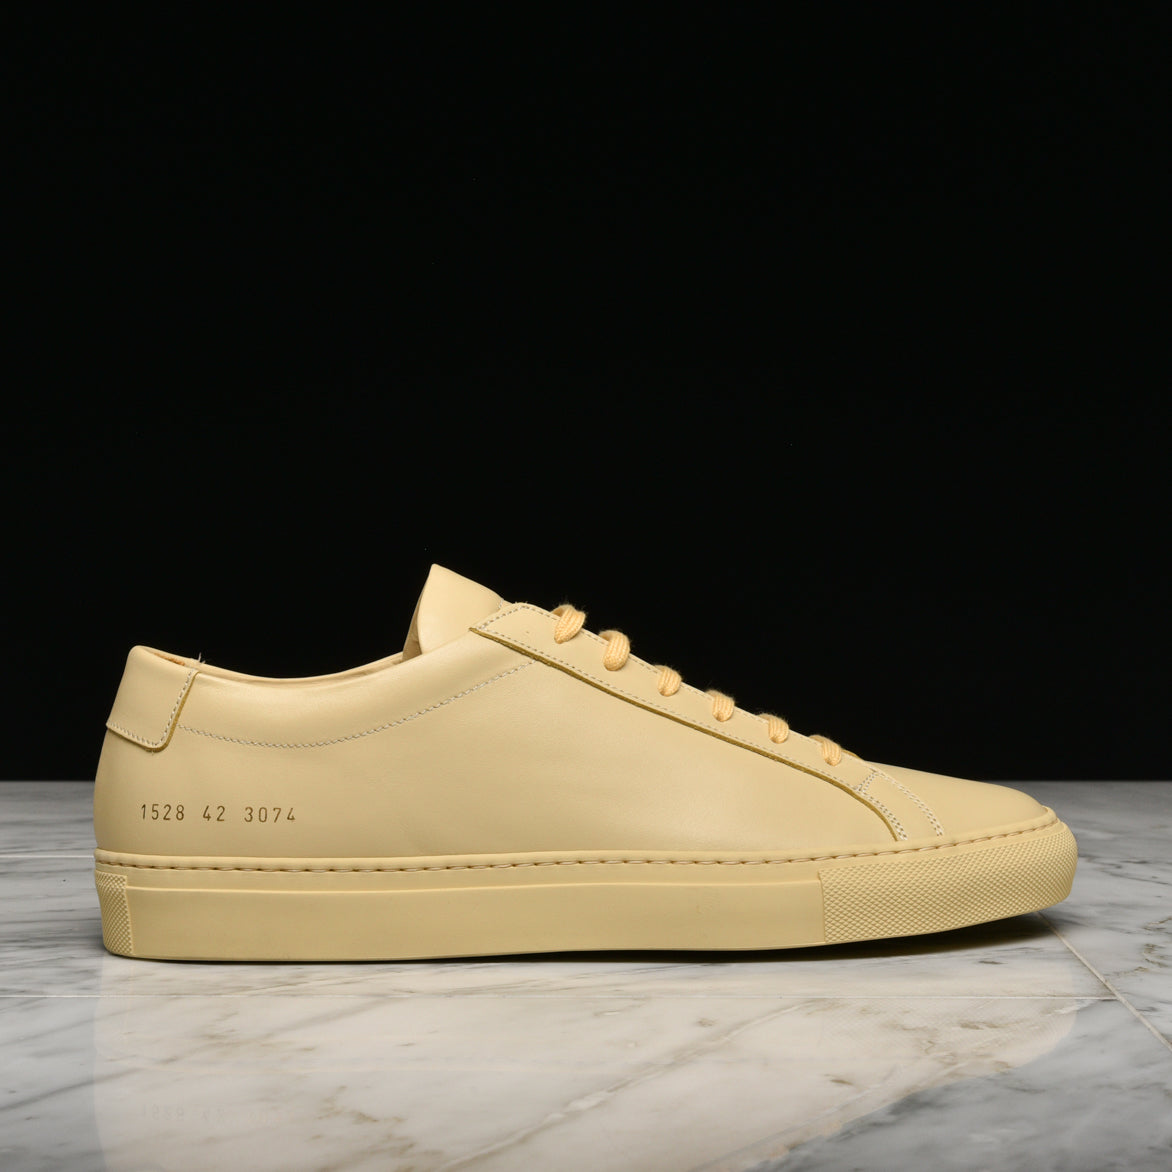 common projects achilles low yellow